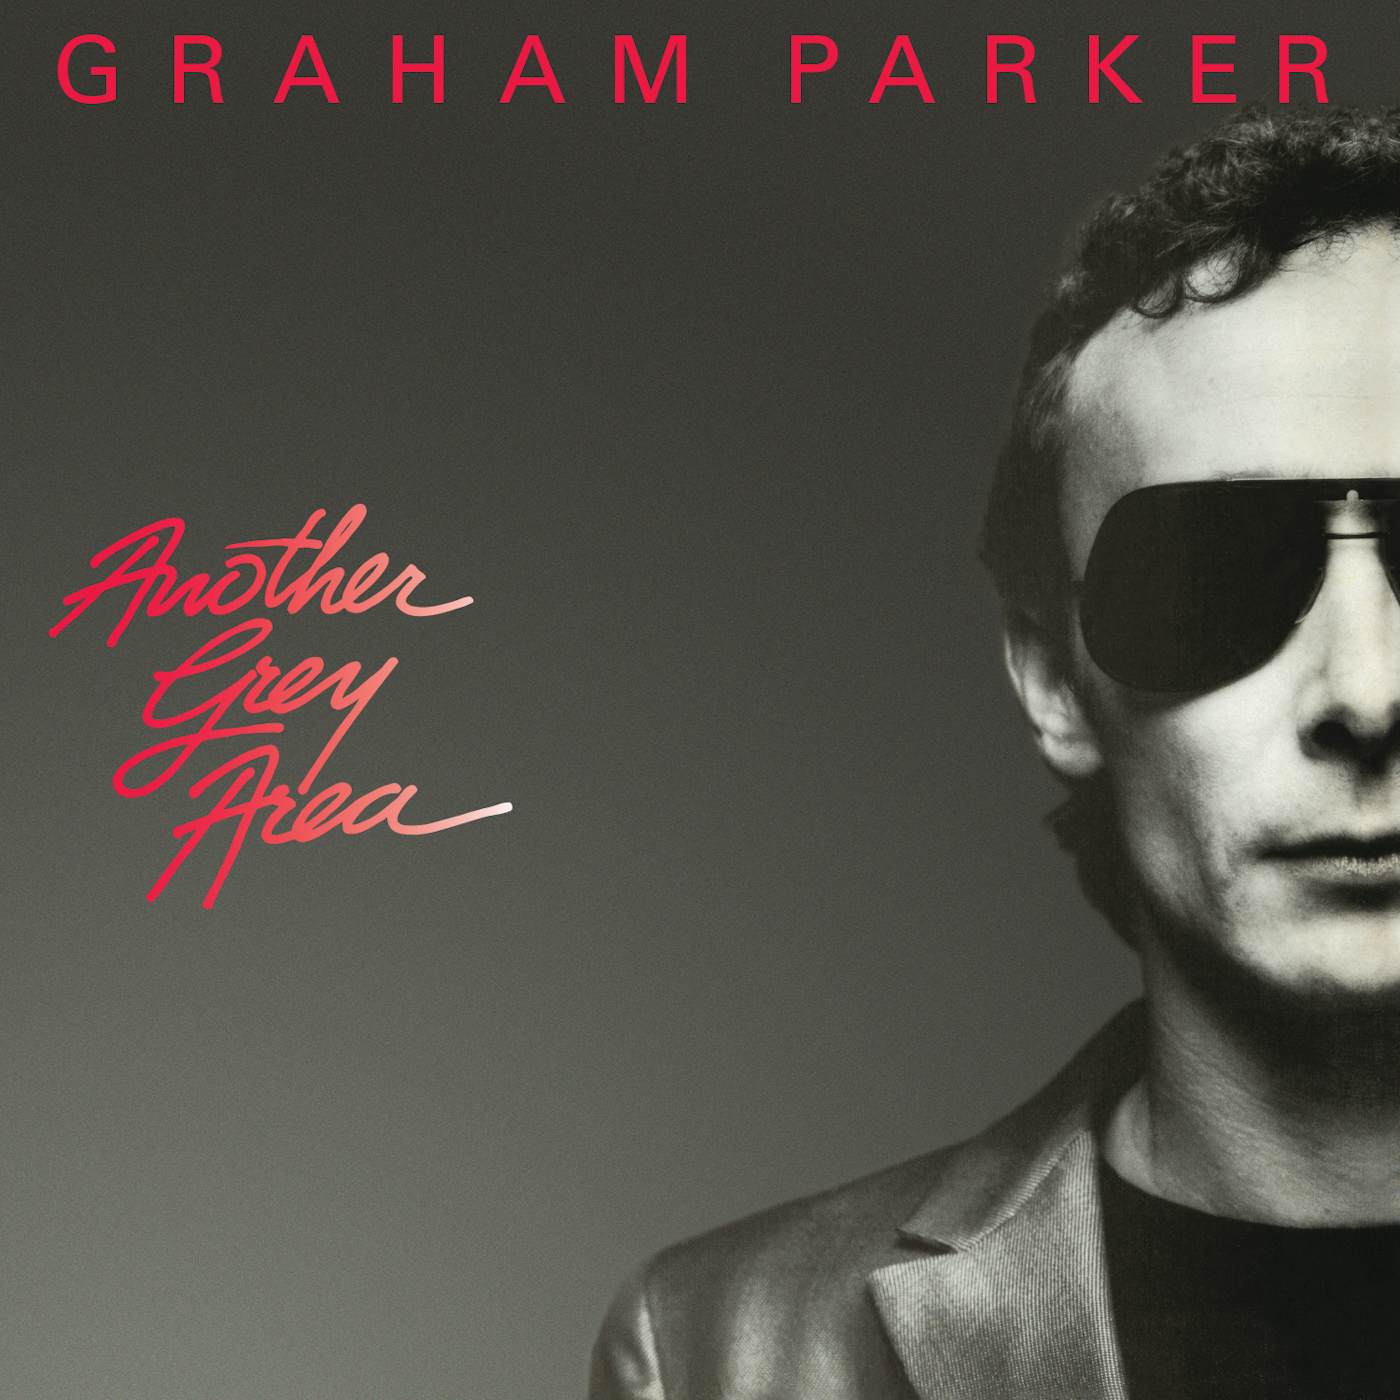 Graham Parker ANOTHER GREY AREA (40TH ANNIVERSARY EDITION) CD